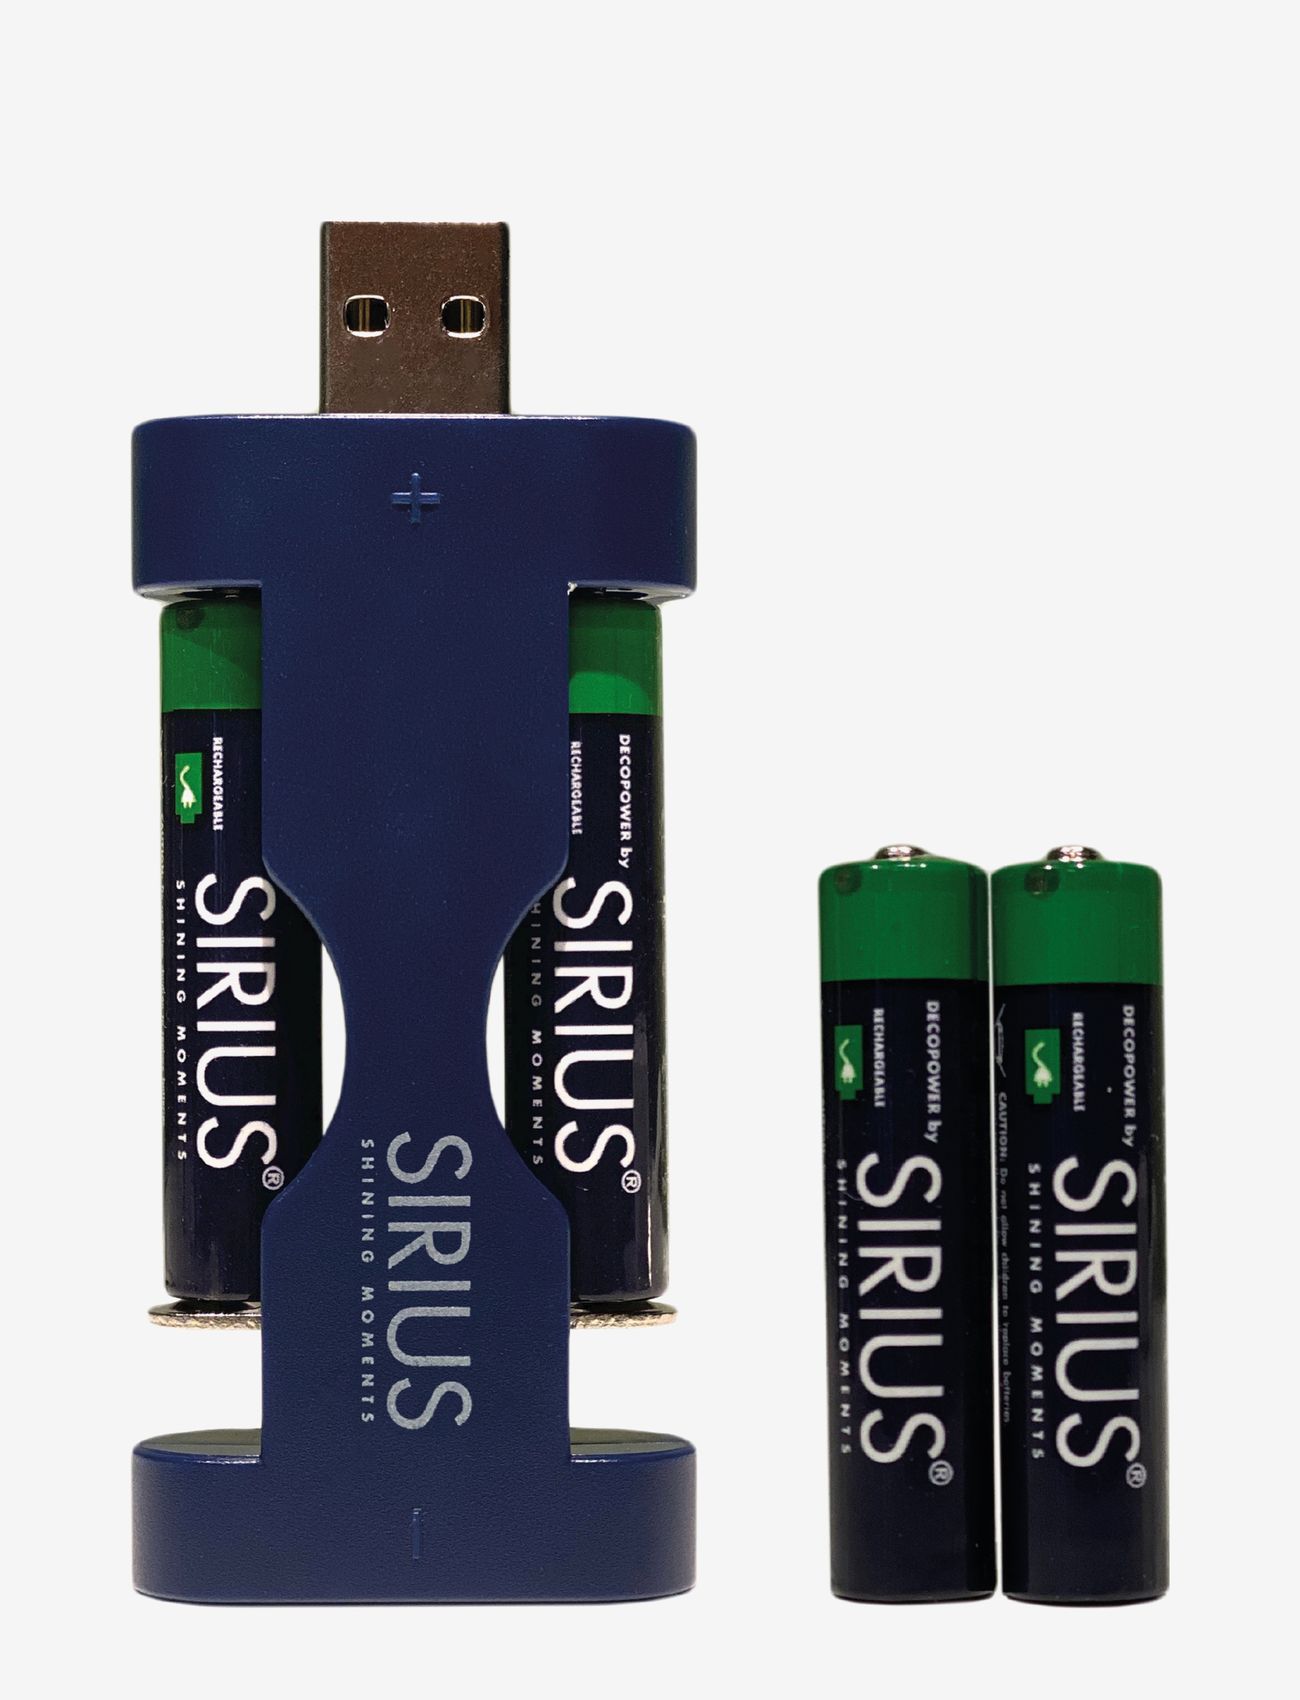 Sirius Home - DecoPower USB Charger incl. 4xAAA Rechargeable Batteries - madalaimad hinnad - no colour - 0